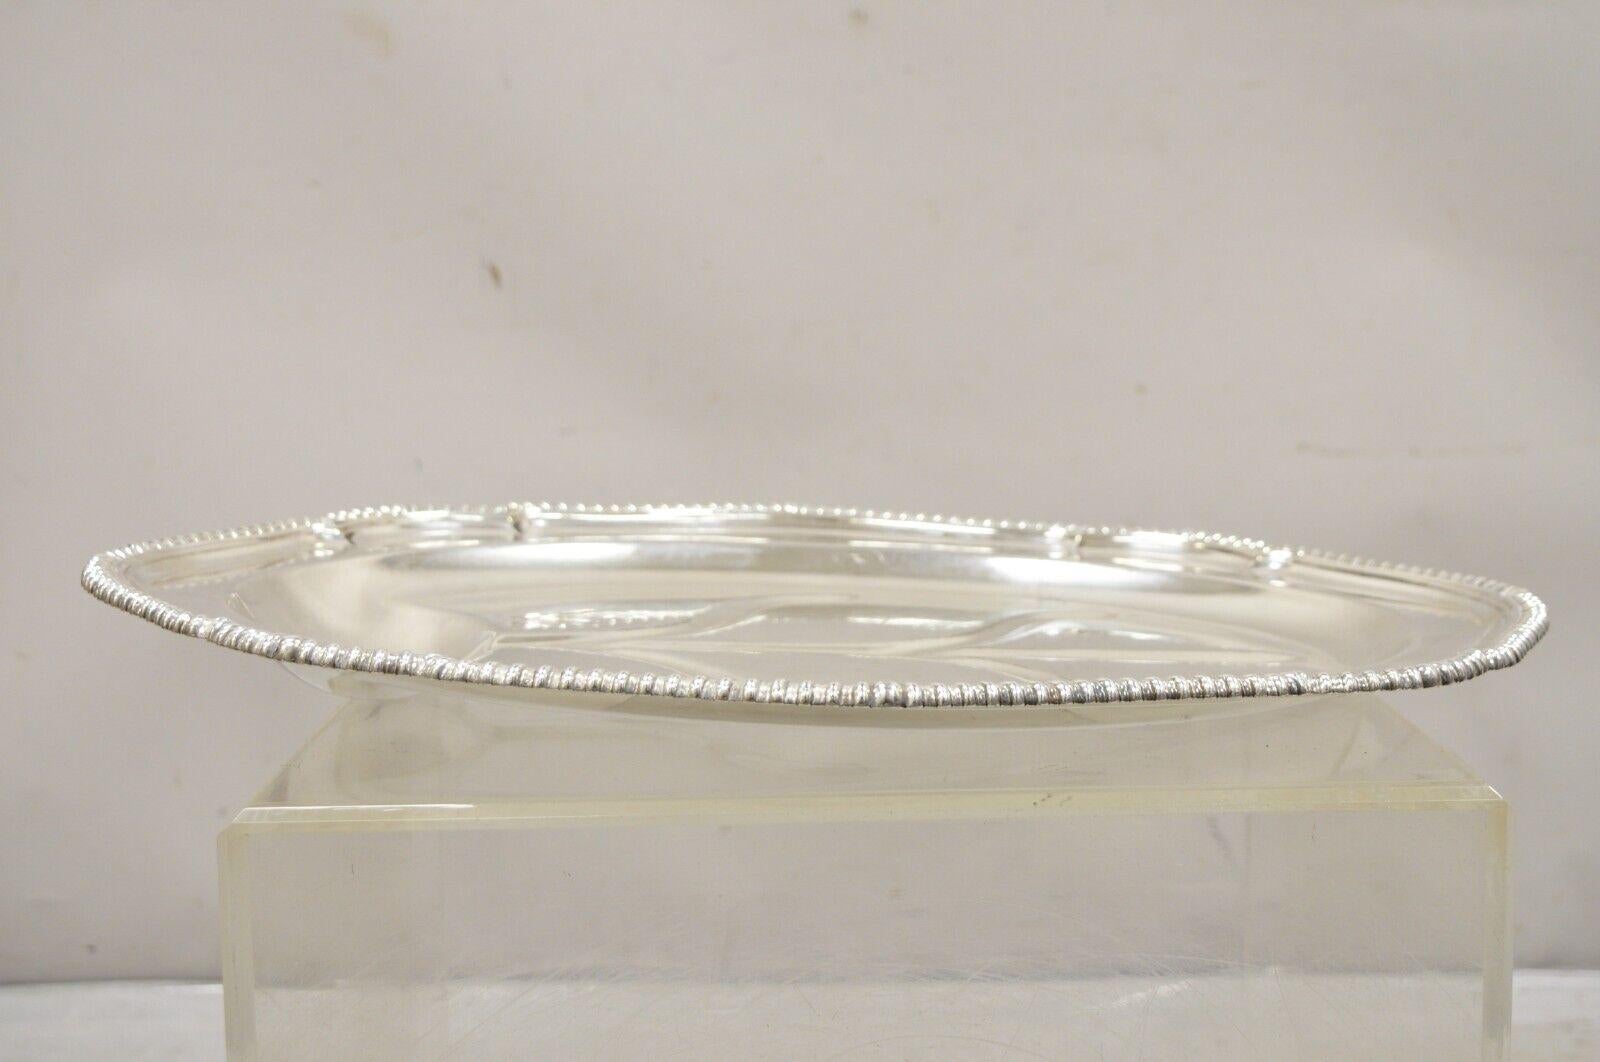 Antique English Regency Oval Silver Plated Meat Cutlery Serving Platter Tray. Item features two engraved deer head to rim, original hallmark very nice antique tray. Does not sit evenly (see pics). Circa Early to Mid 20th Century. Measurements: 2